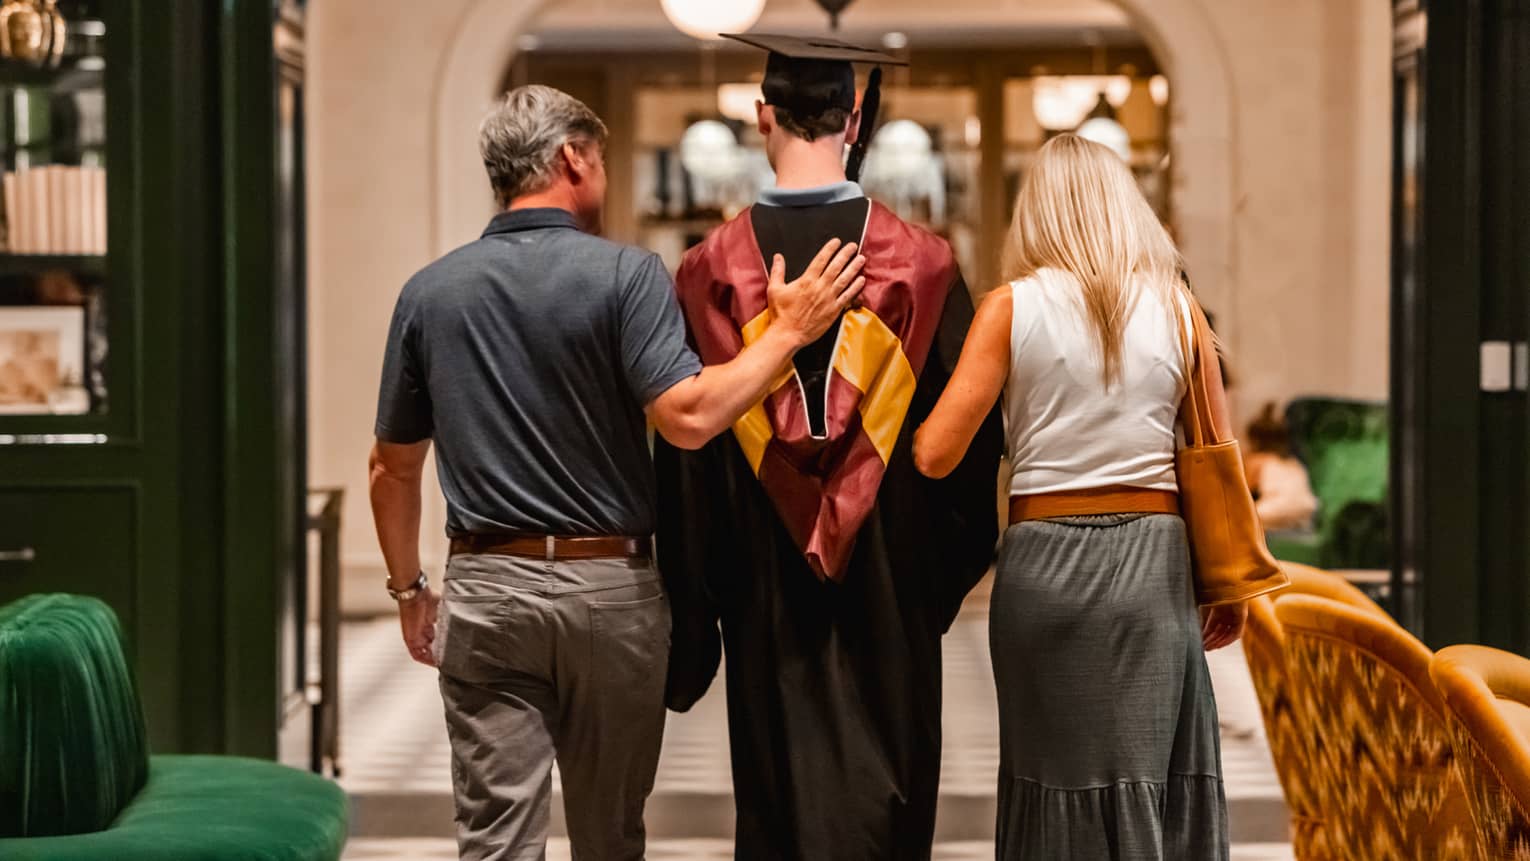 Parents walking with child in graduation gown.